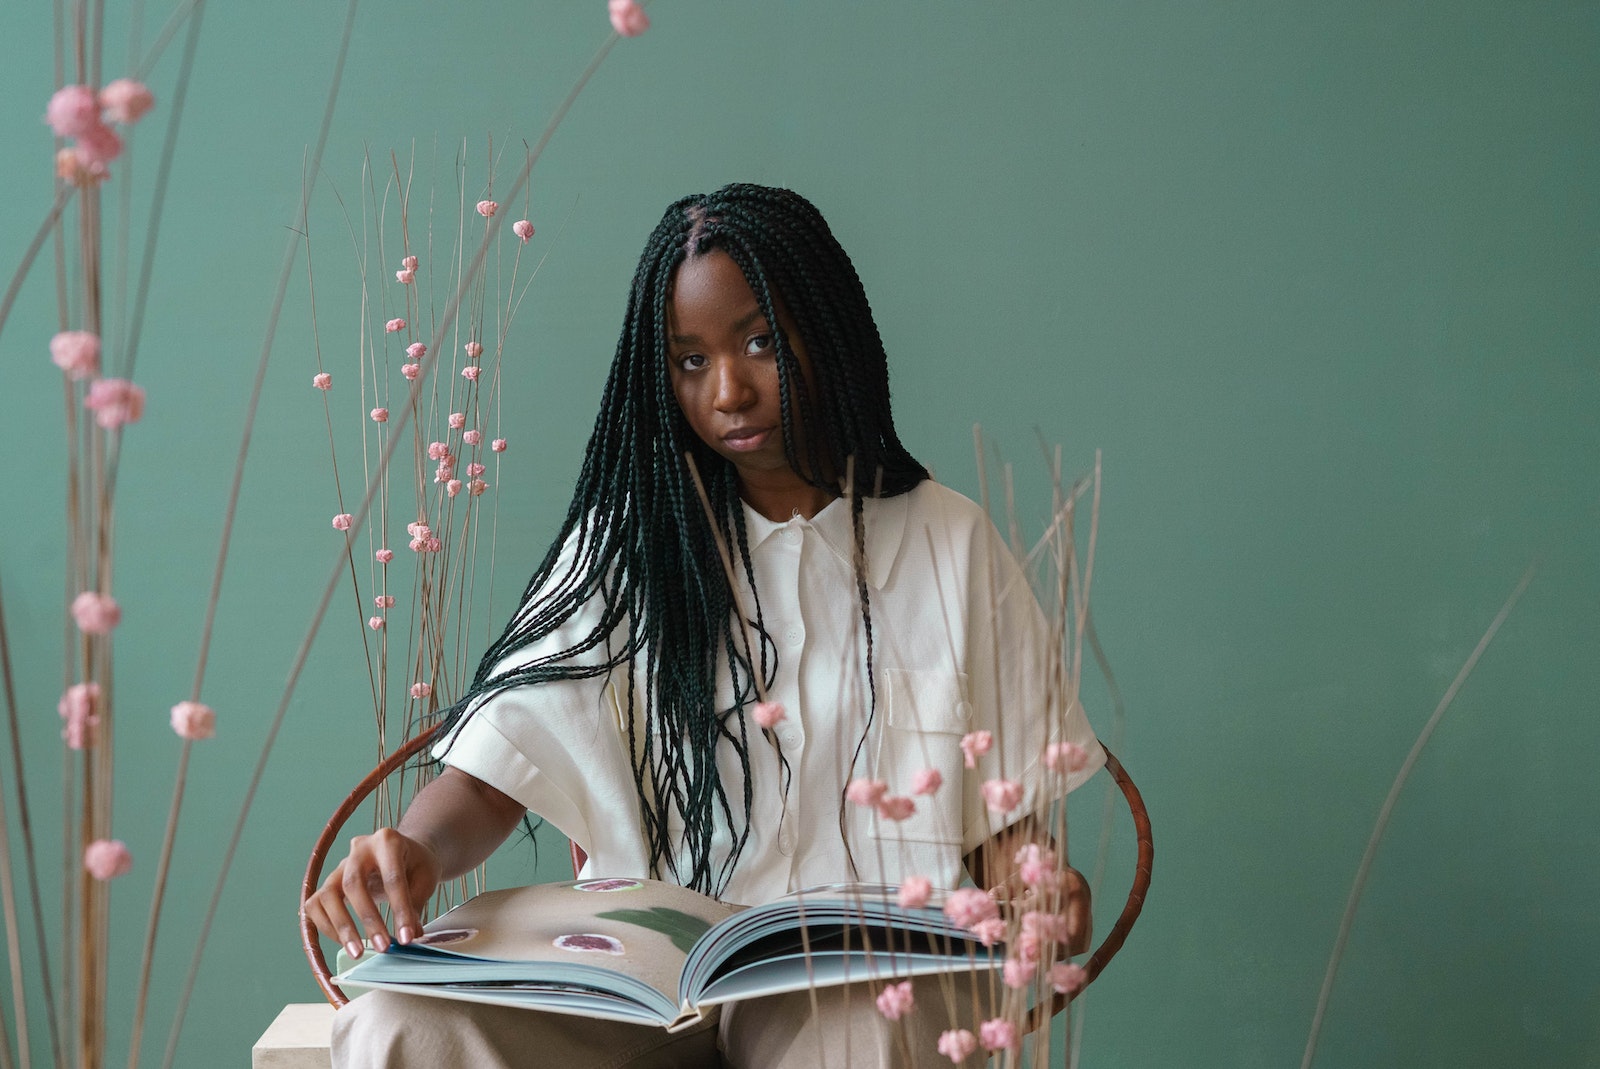 Concentrated young black woman reading illustrated book in green studio near blooming flowers